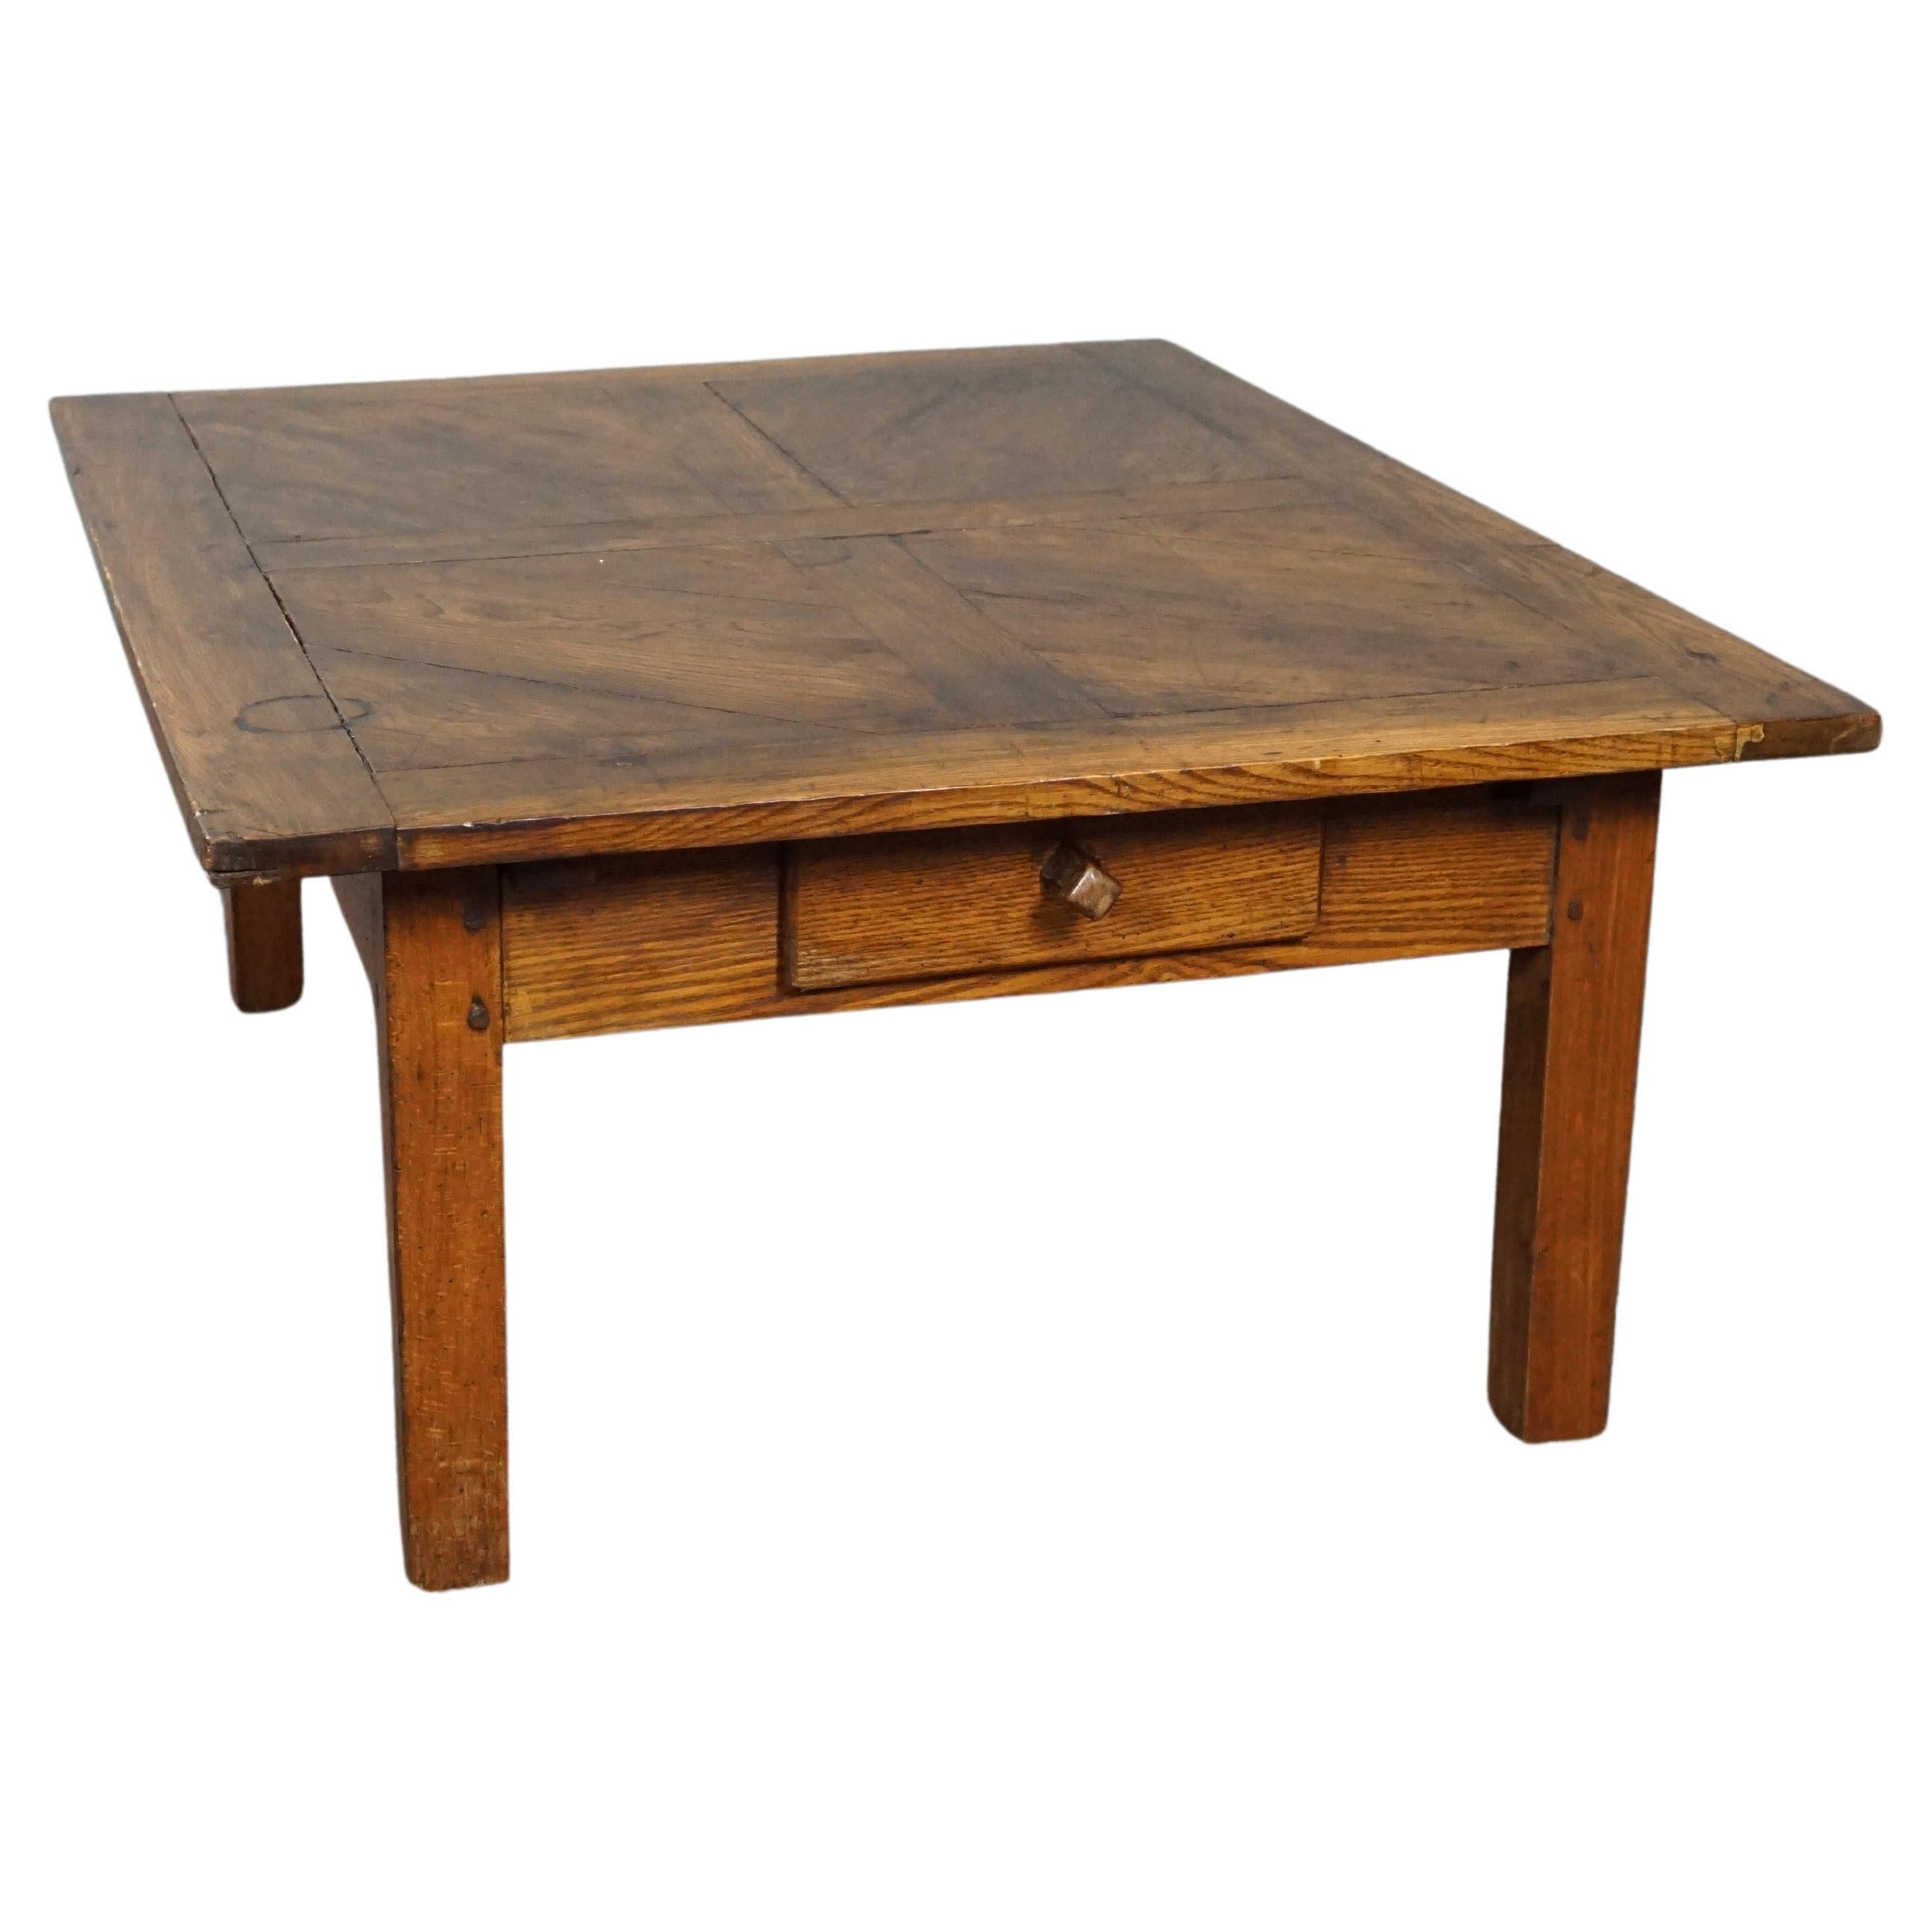 Striking antique Southern European coffee table For Sale